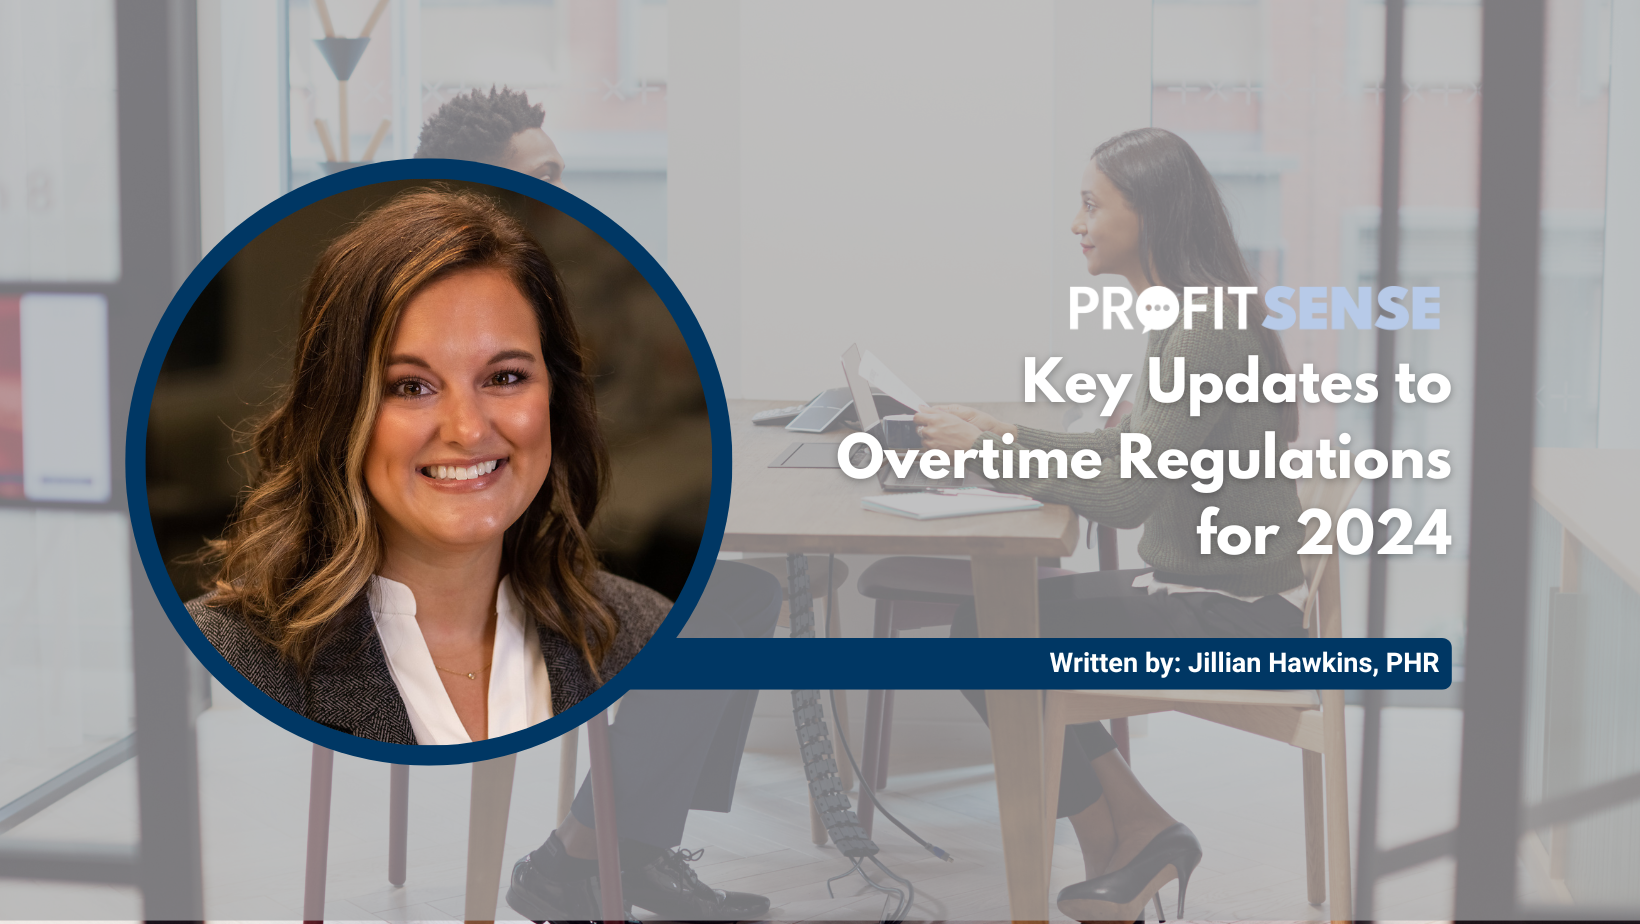 Key Updates to Overtime Regulations for 2024